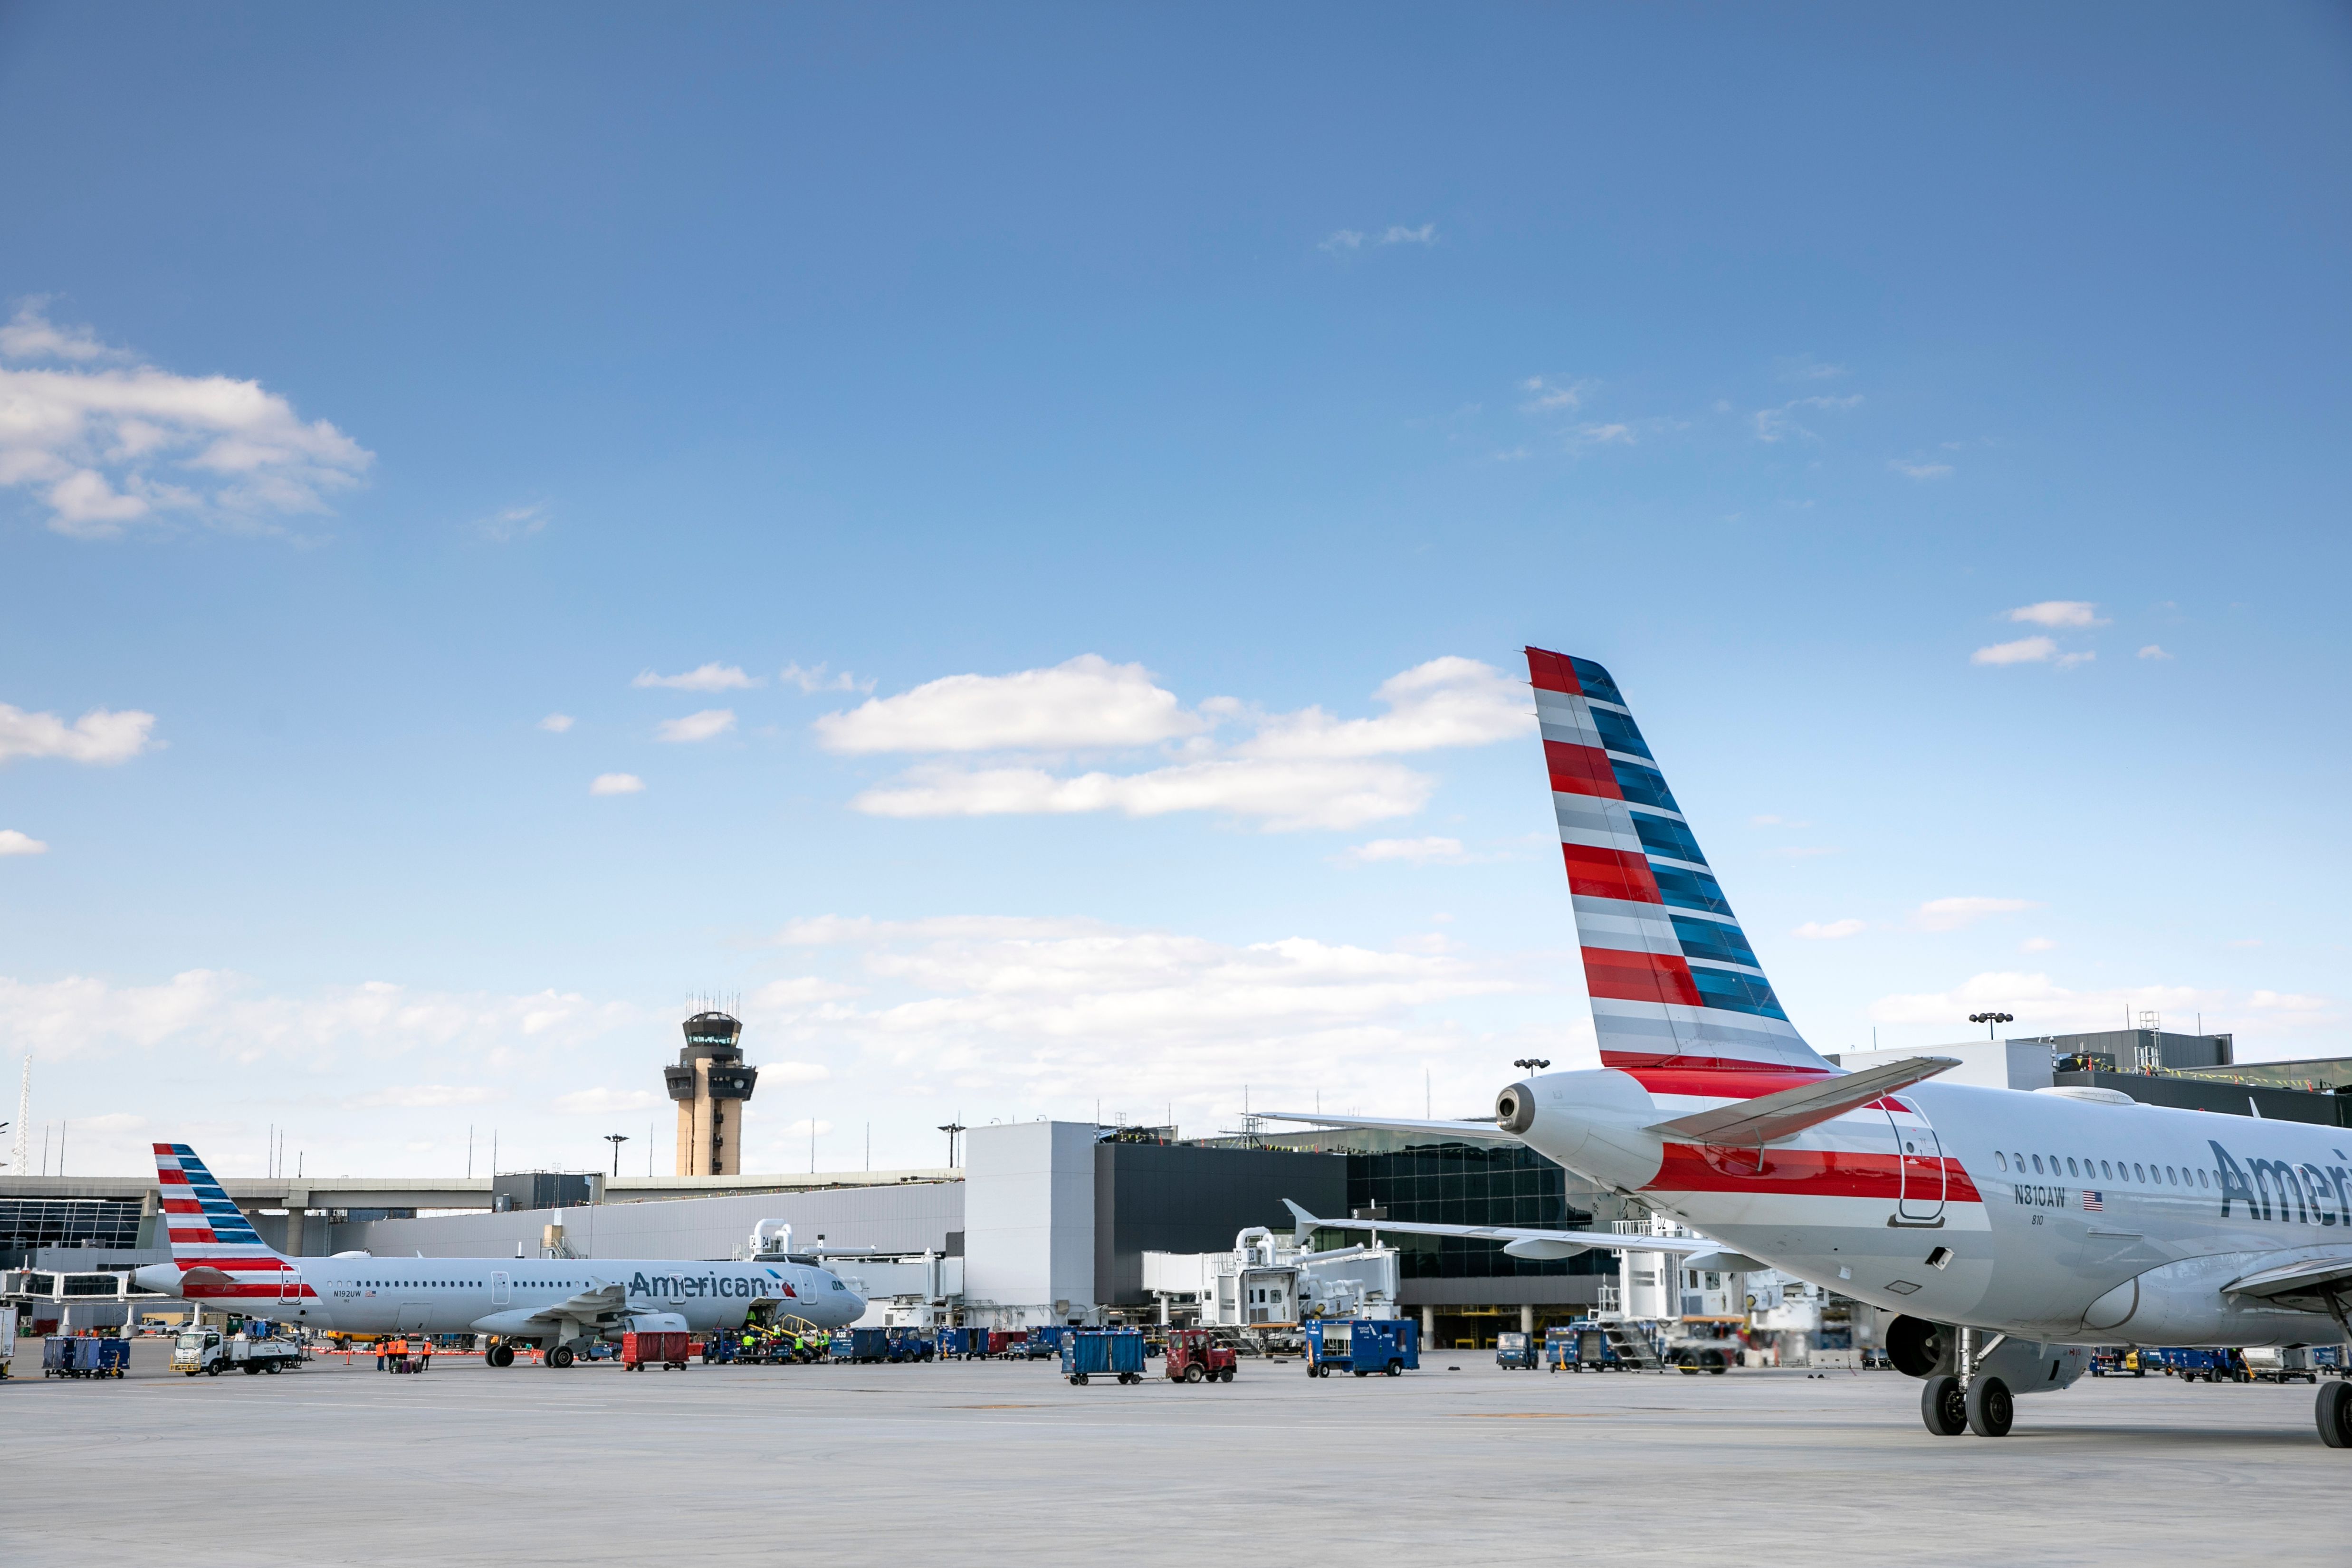 American Airlines with the tower at Dallas Fort Worth Airport